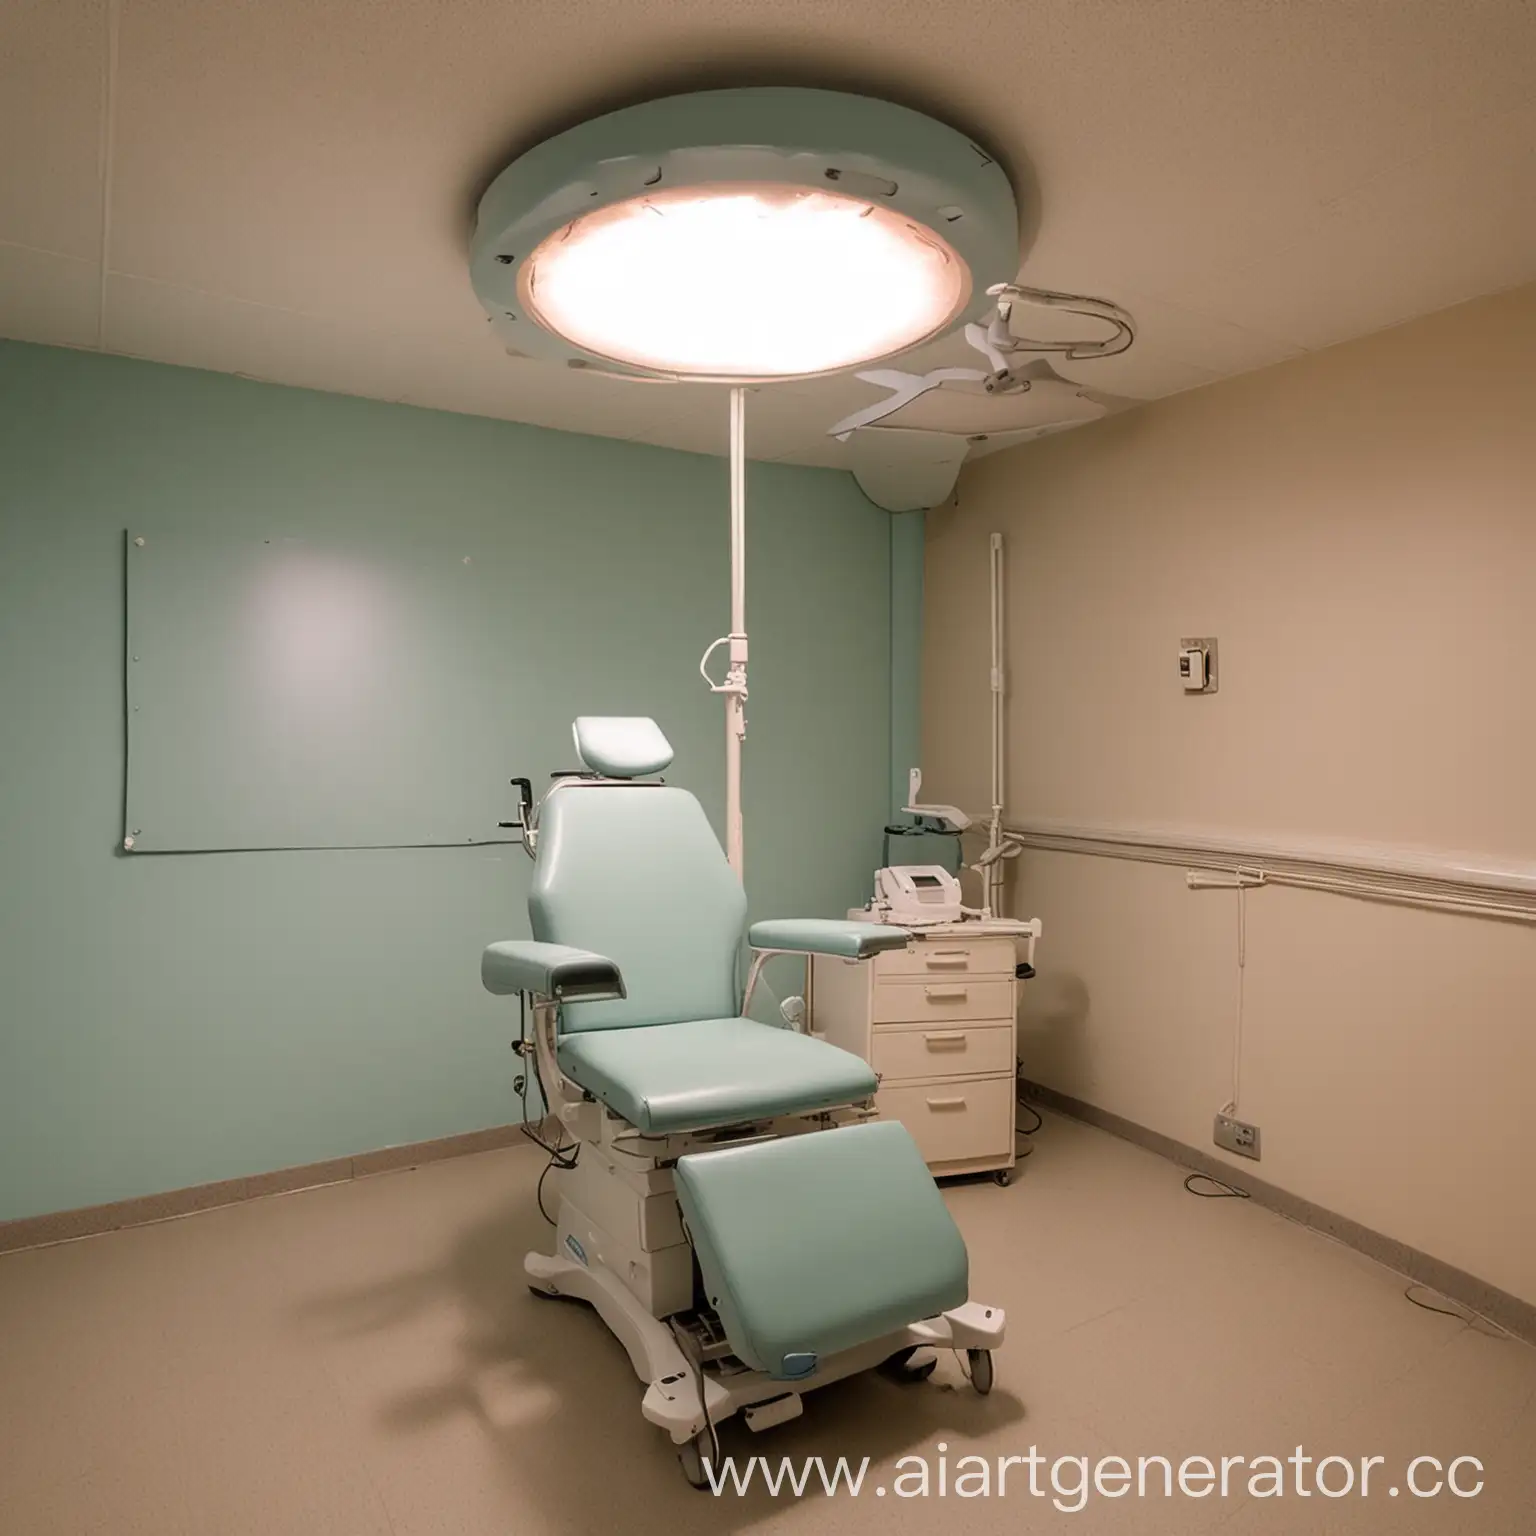 Psychological-Clinic-with-Gynecological-Chair-and-Ceiling-Lamp